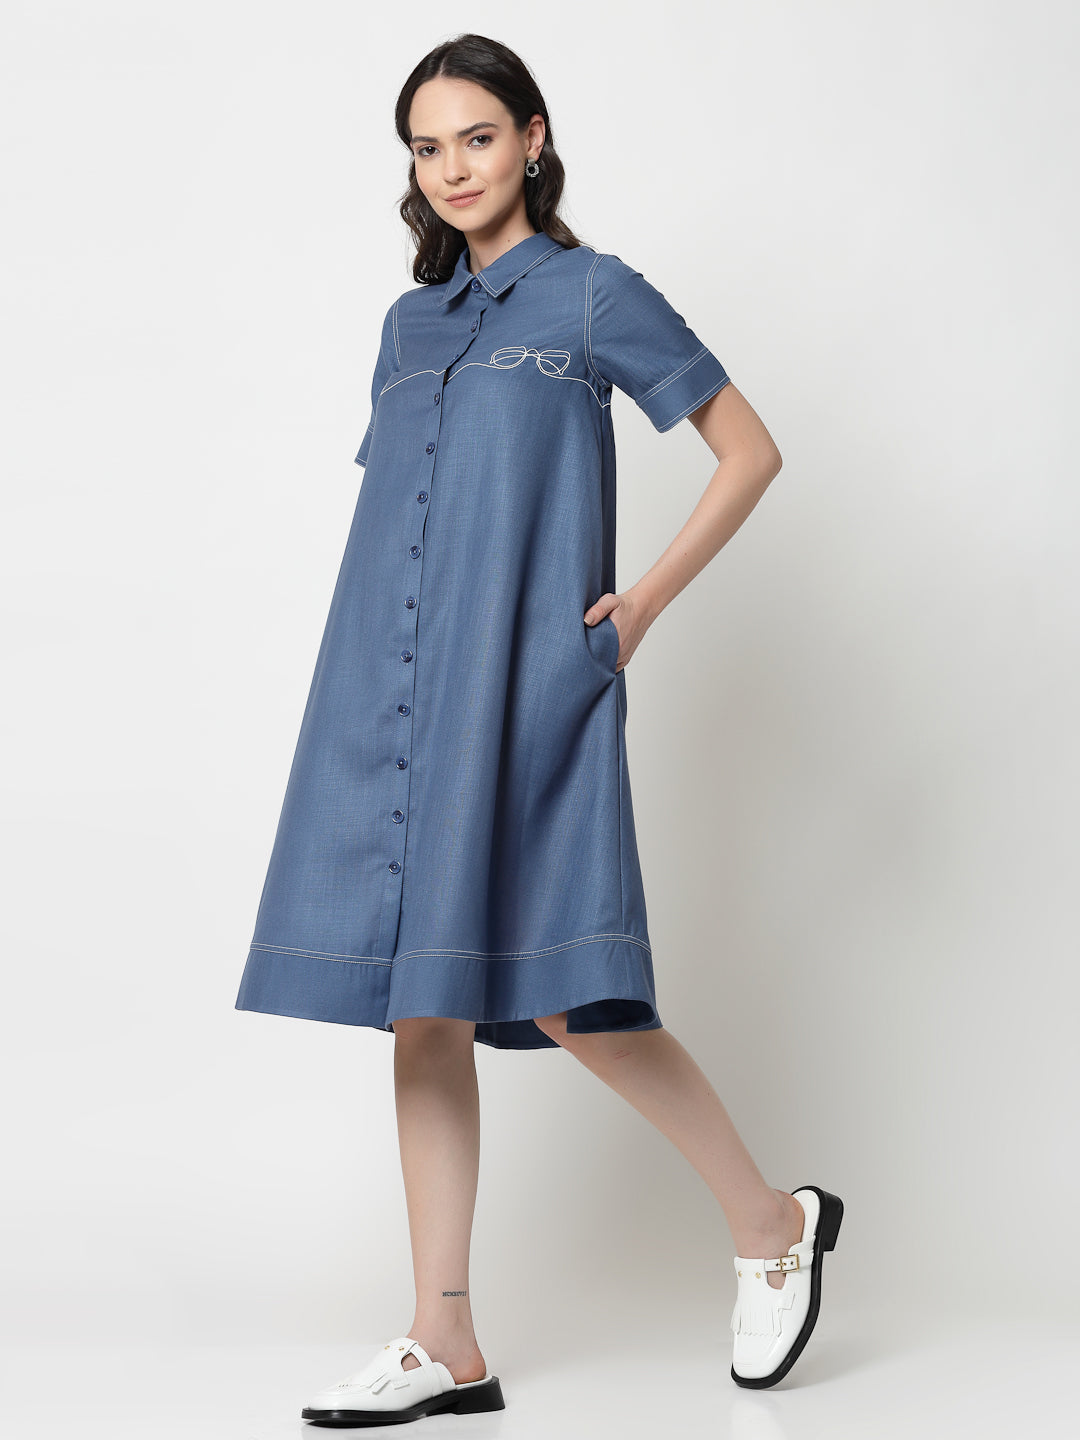 Dark Blue Dress With Embroidered Spectacles